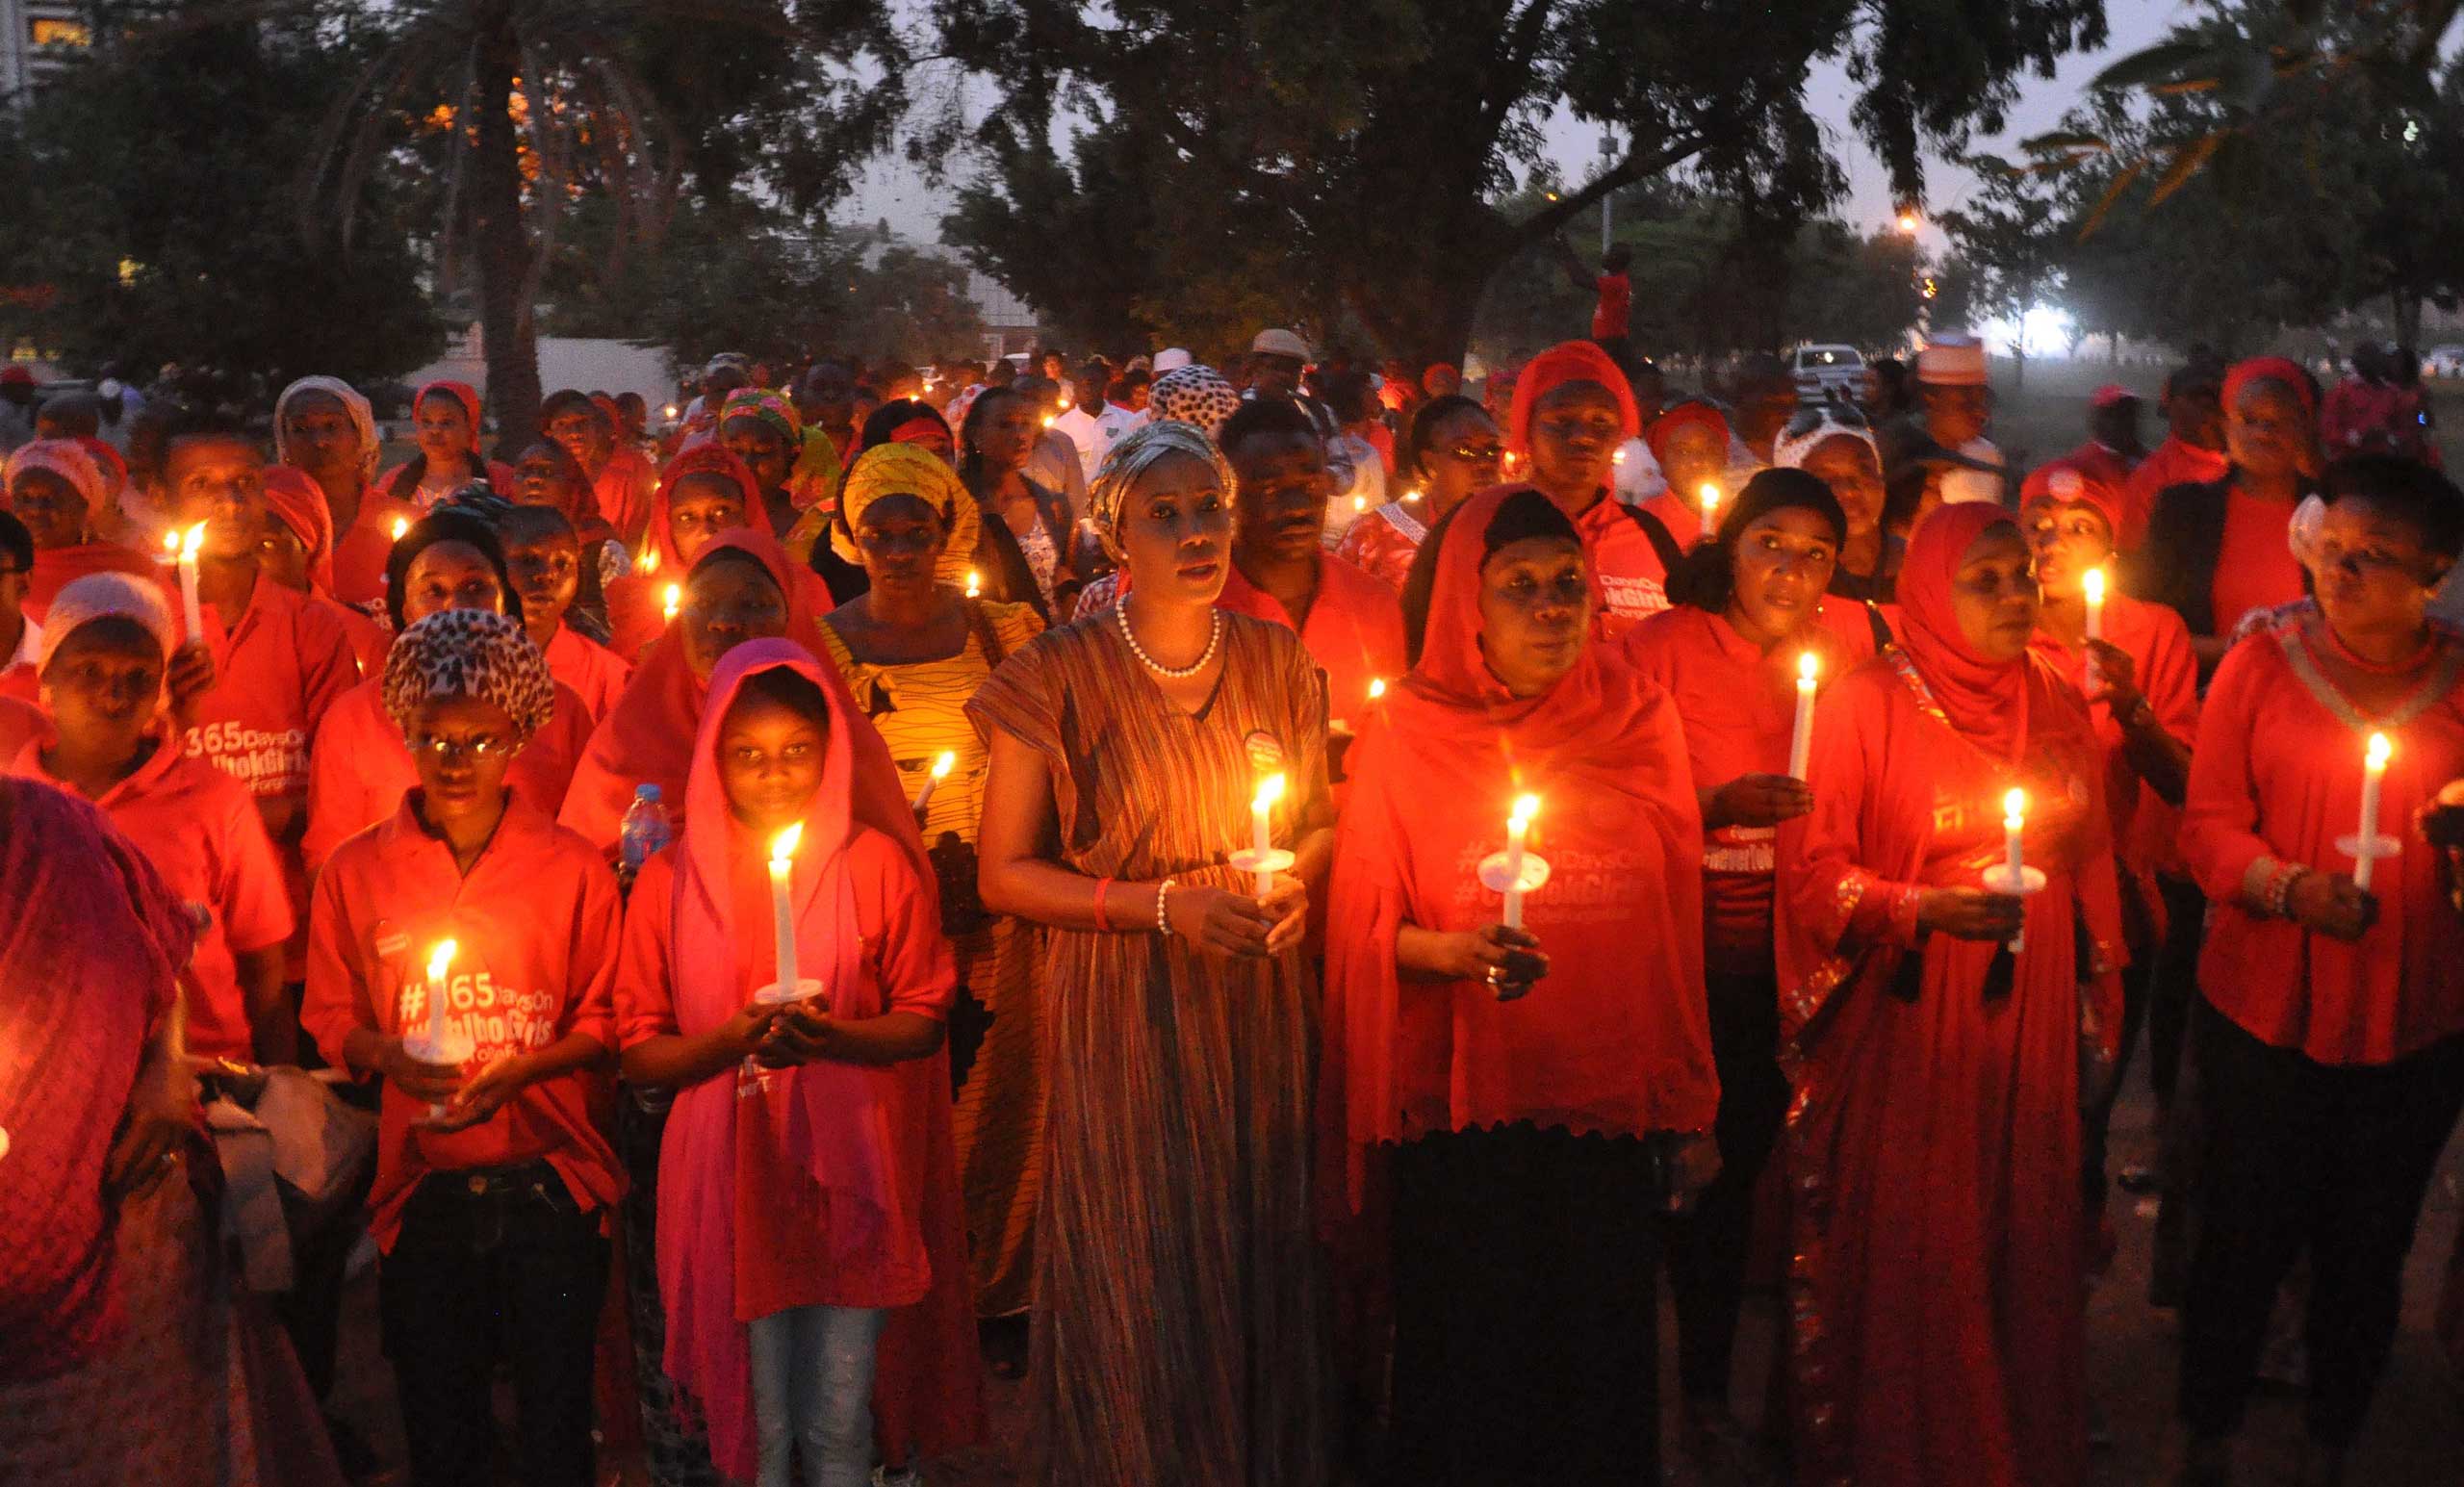 Nigerians holding candles during a vigil for the one year anniversary of the kidnapping of hundreds of Nigerian school girls in Chibok, Abuja, Nigeria on April 14, 2015. (EPA)